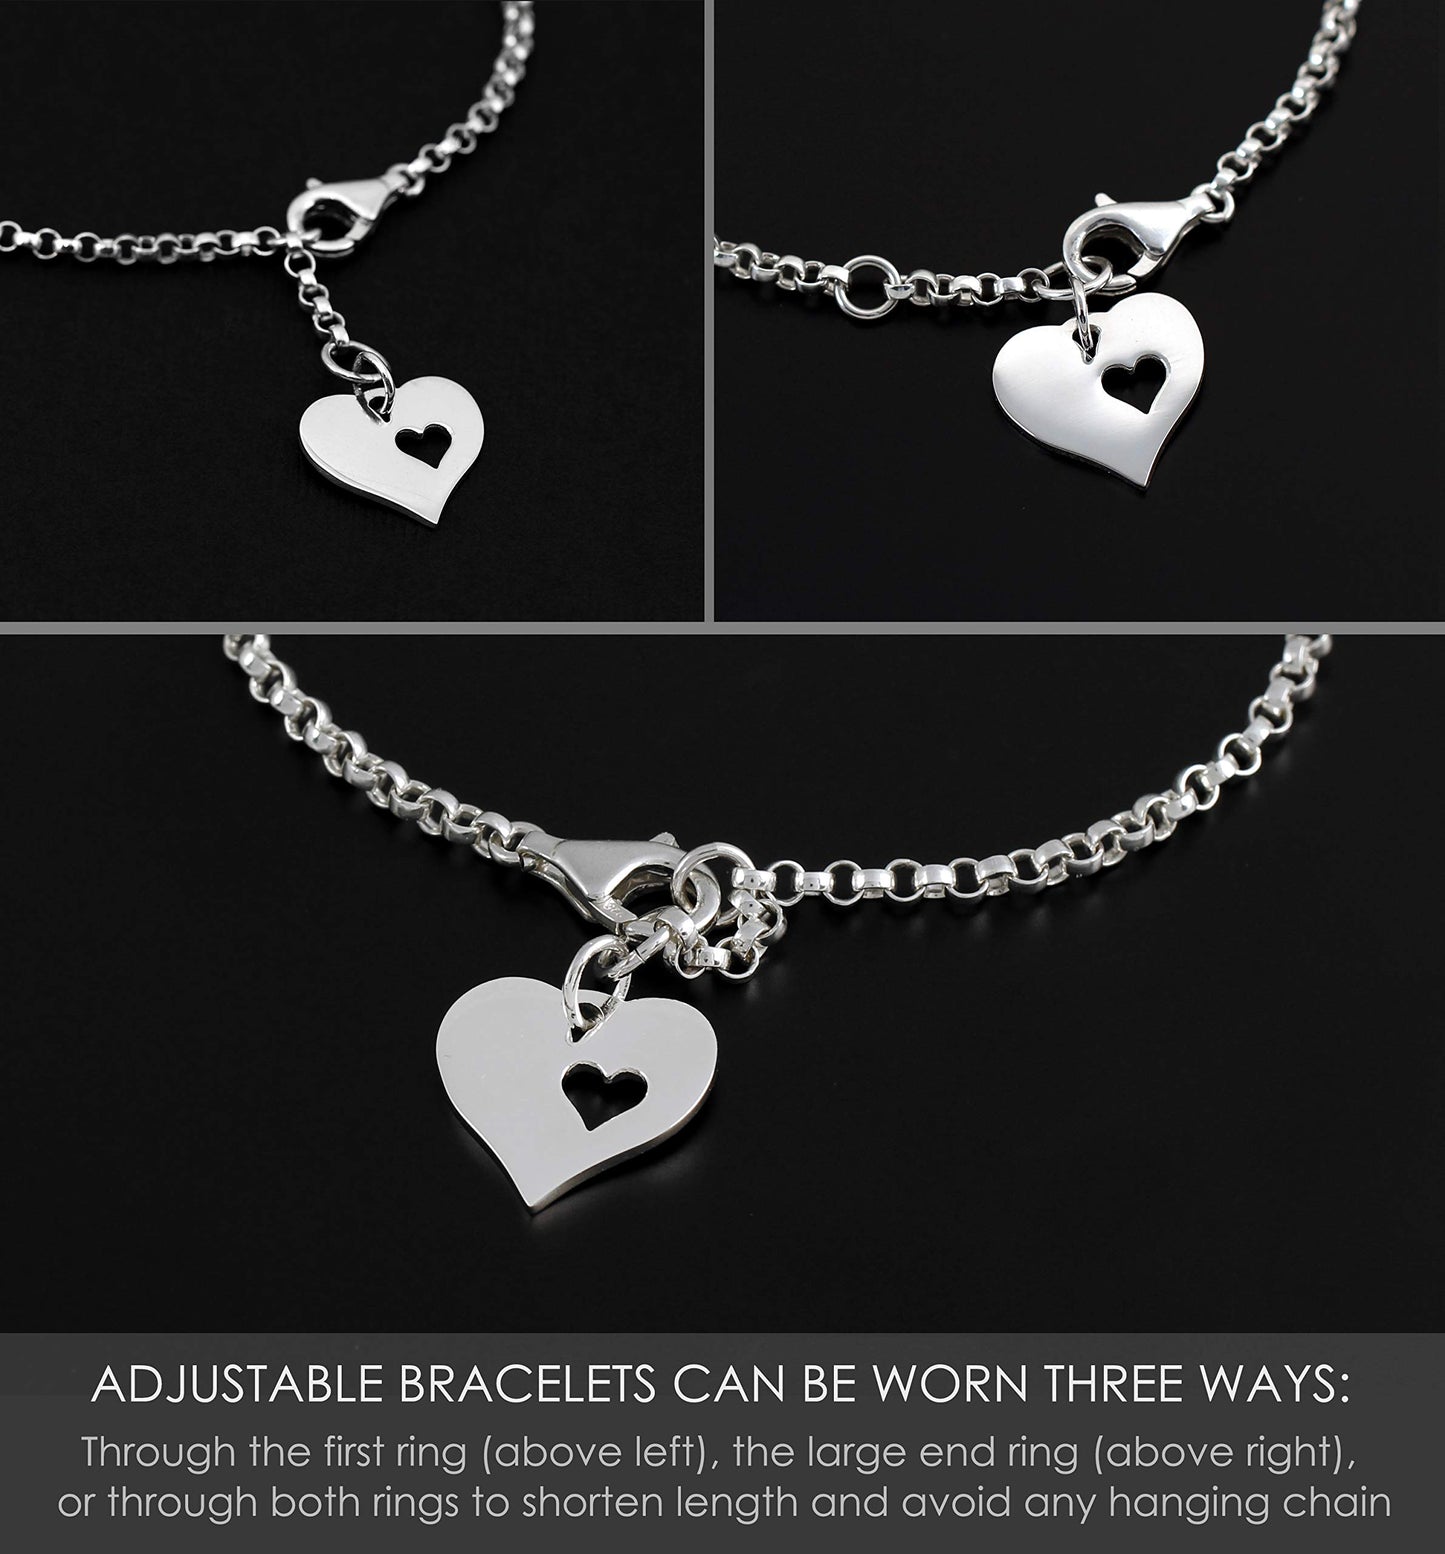 I Carry Your Heart with Me • Silver Bracelet for Women • Missing You Gift • Adoption Surrogate Mom Jewelry • Remembrance Memorial Bracelet • Sorry for Your Loss • Grief Loss Gift